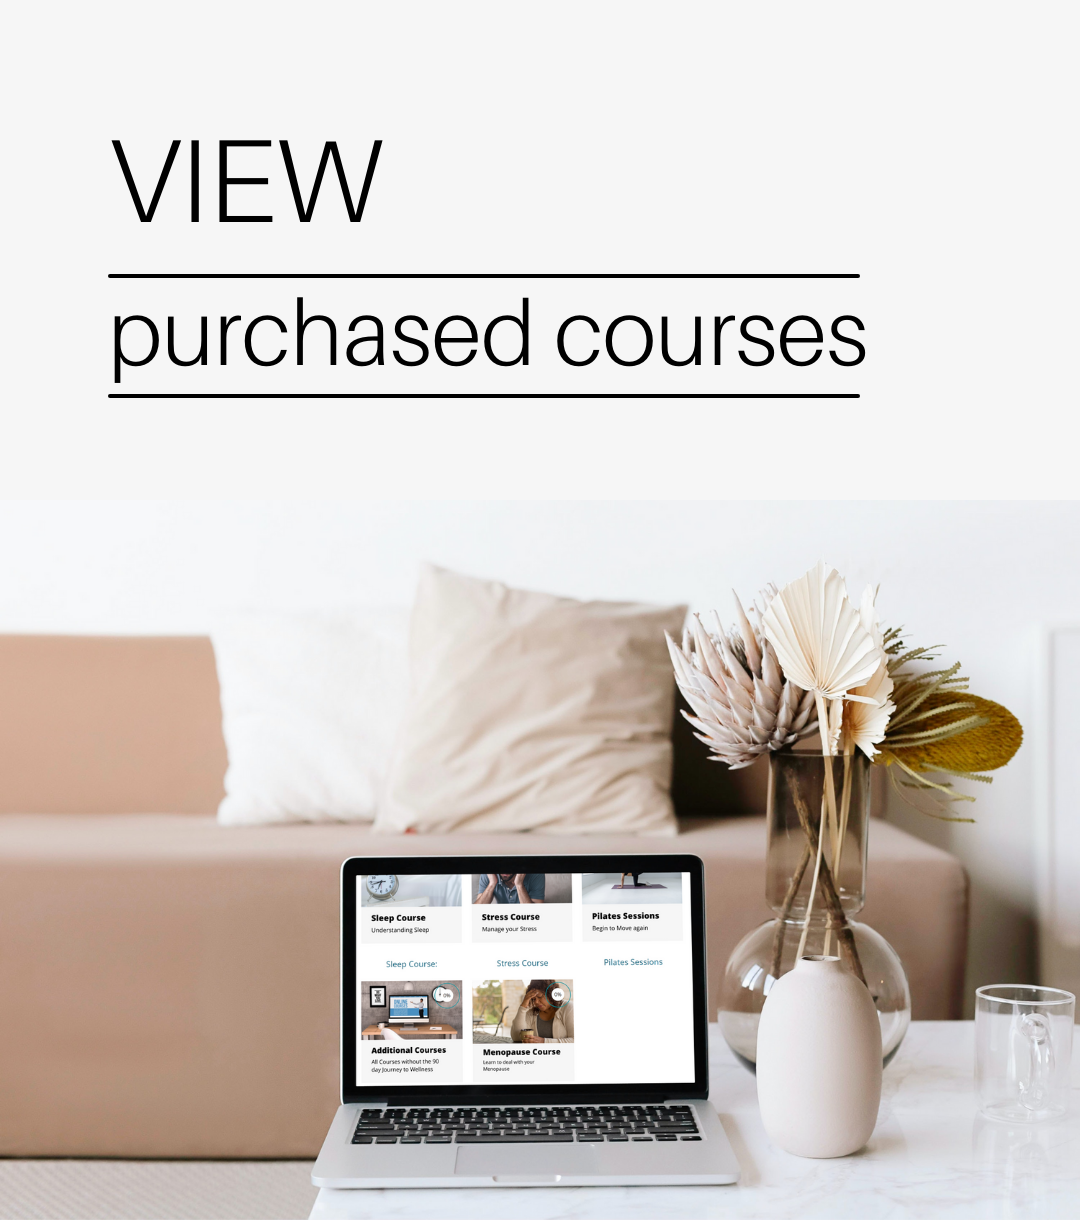 VIew your purchased courses